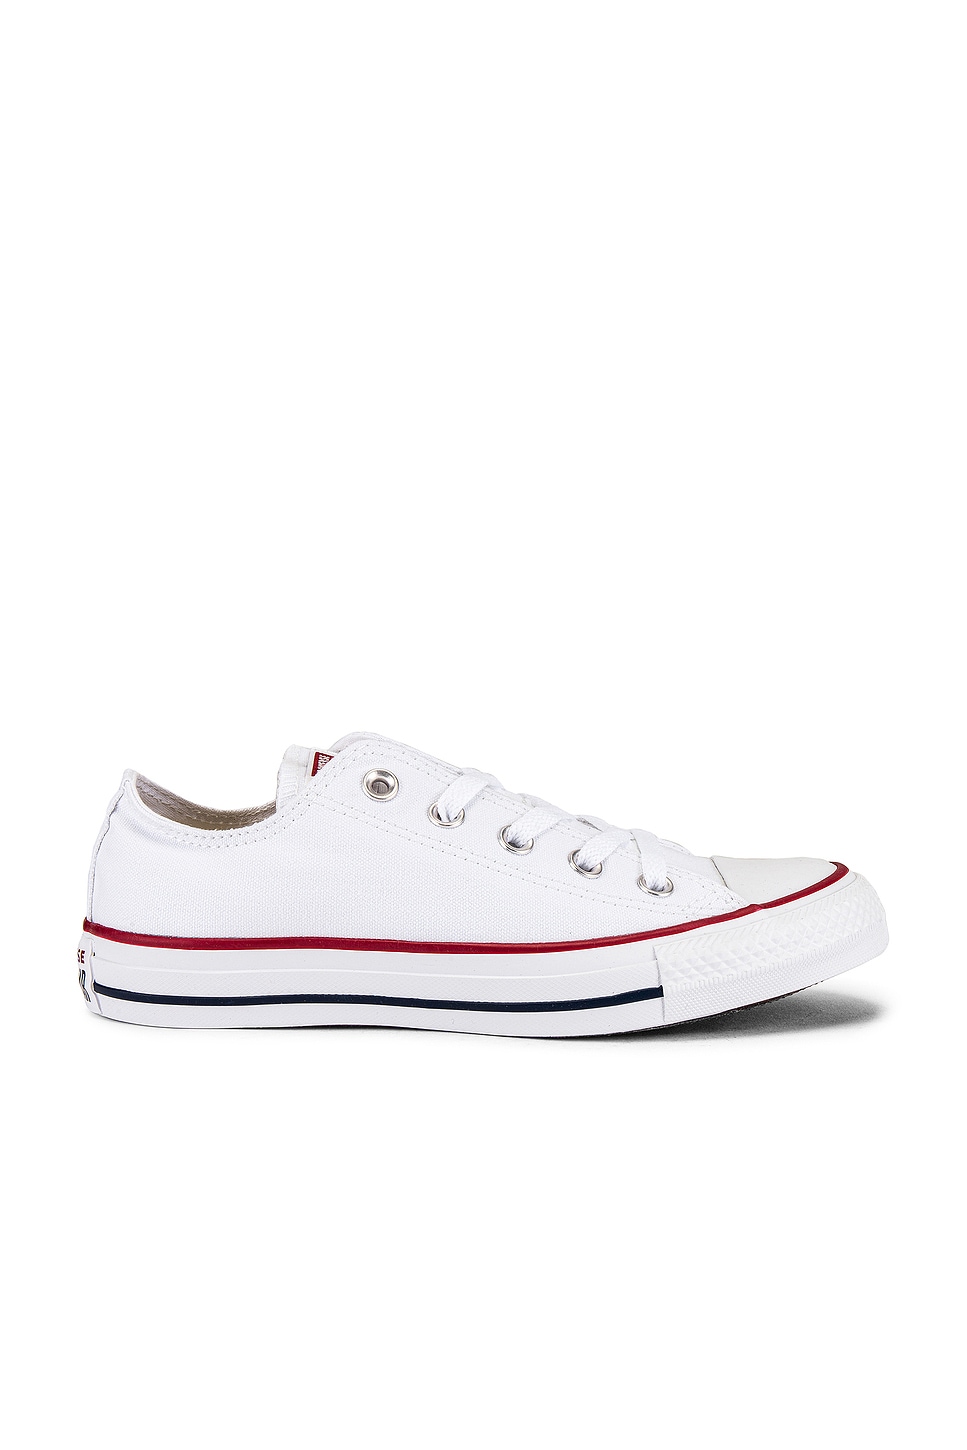 Image 1 of Converse Chuck Taylor All Star Sneaker in Optical White